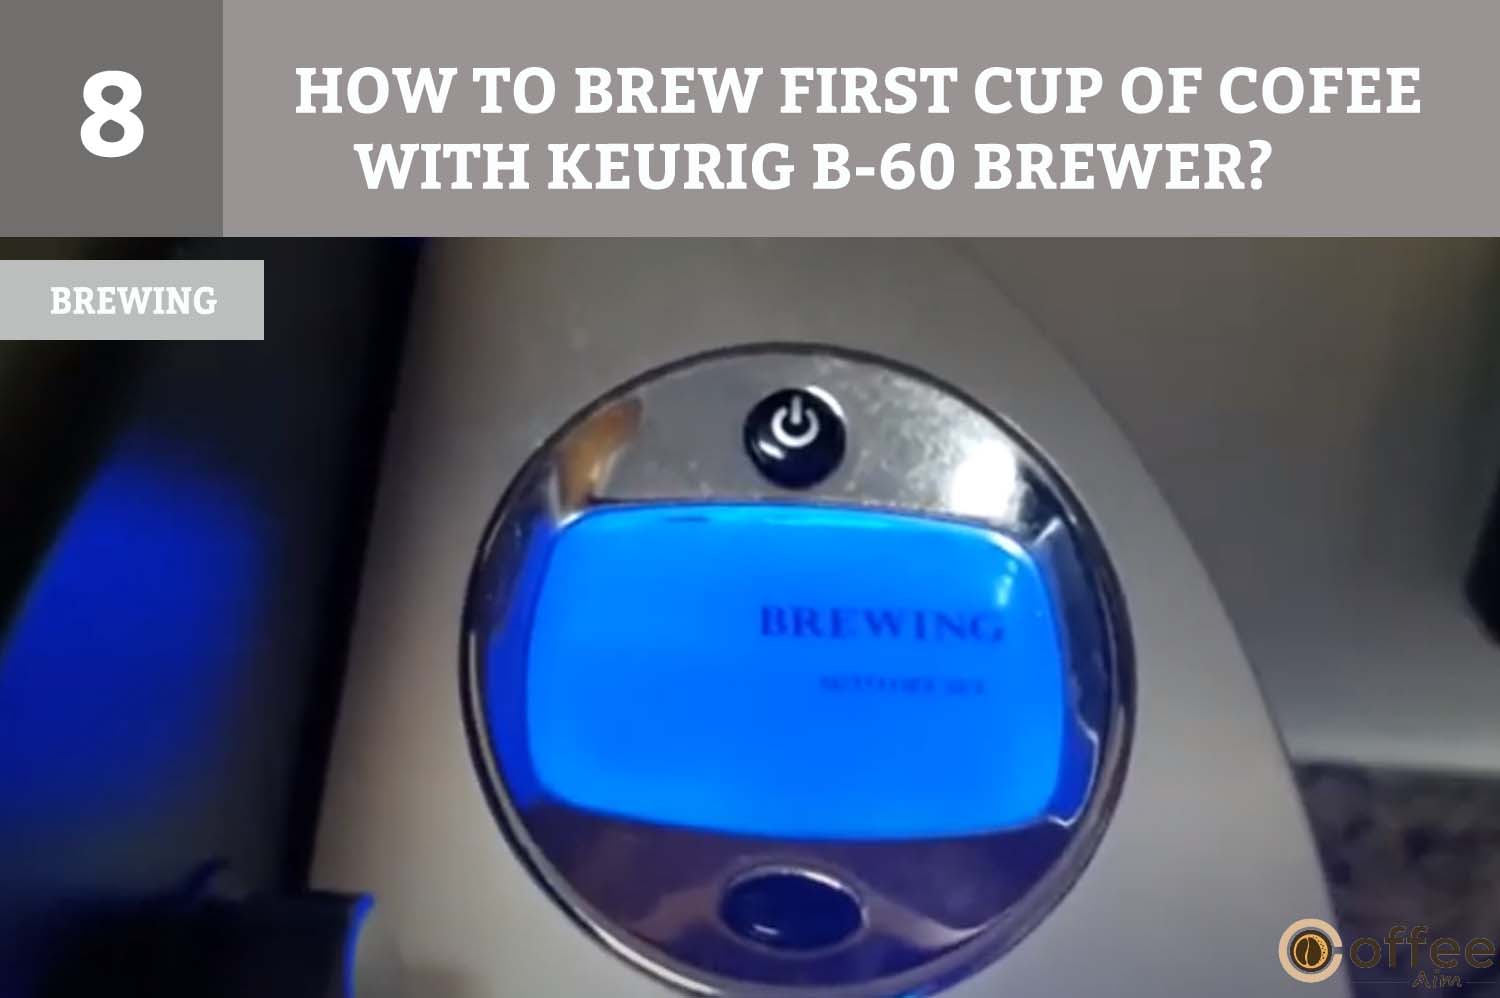 During the brewing process, the LCD Control Center will show "Brewing," and the selected brew size will be highlighted in solid blue.